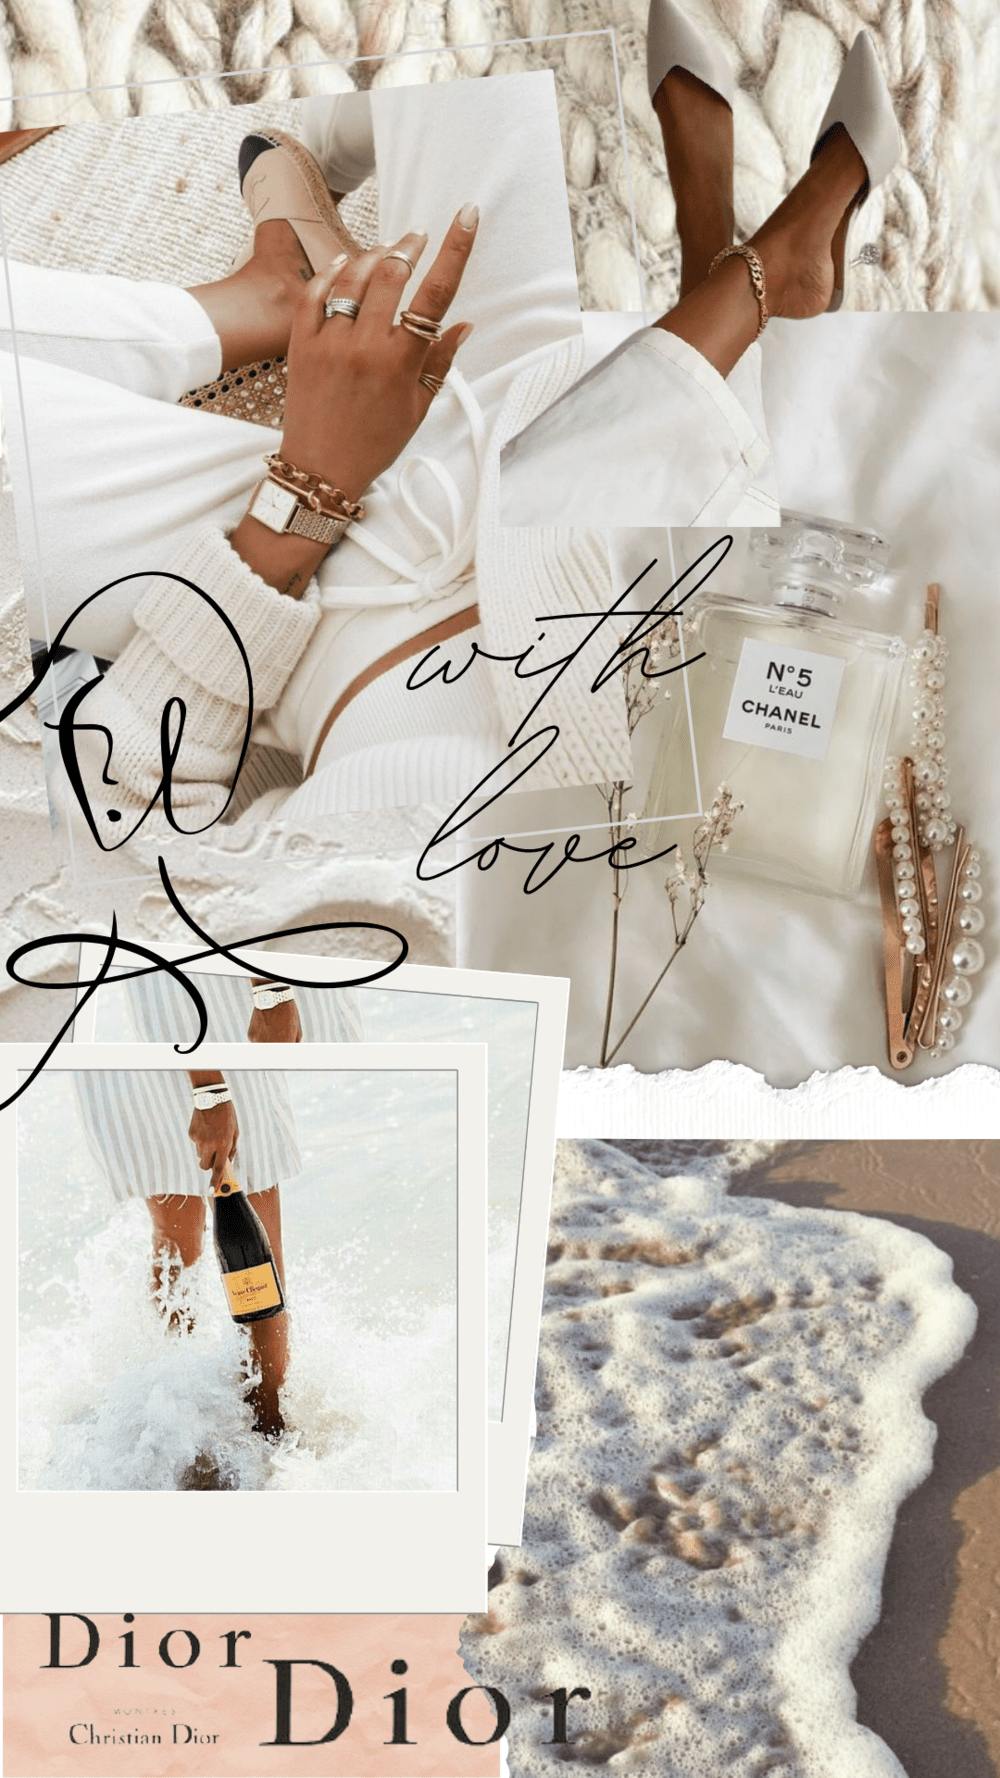 Collage of a woman in white with a dior fragrance and the words 